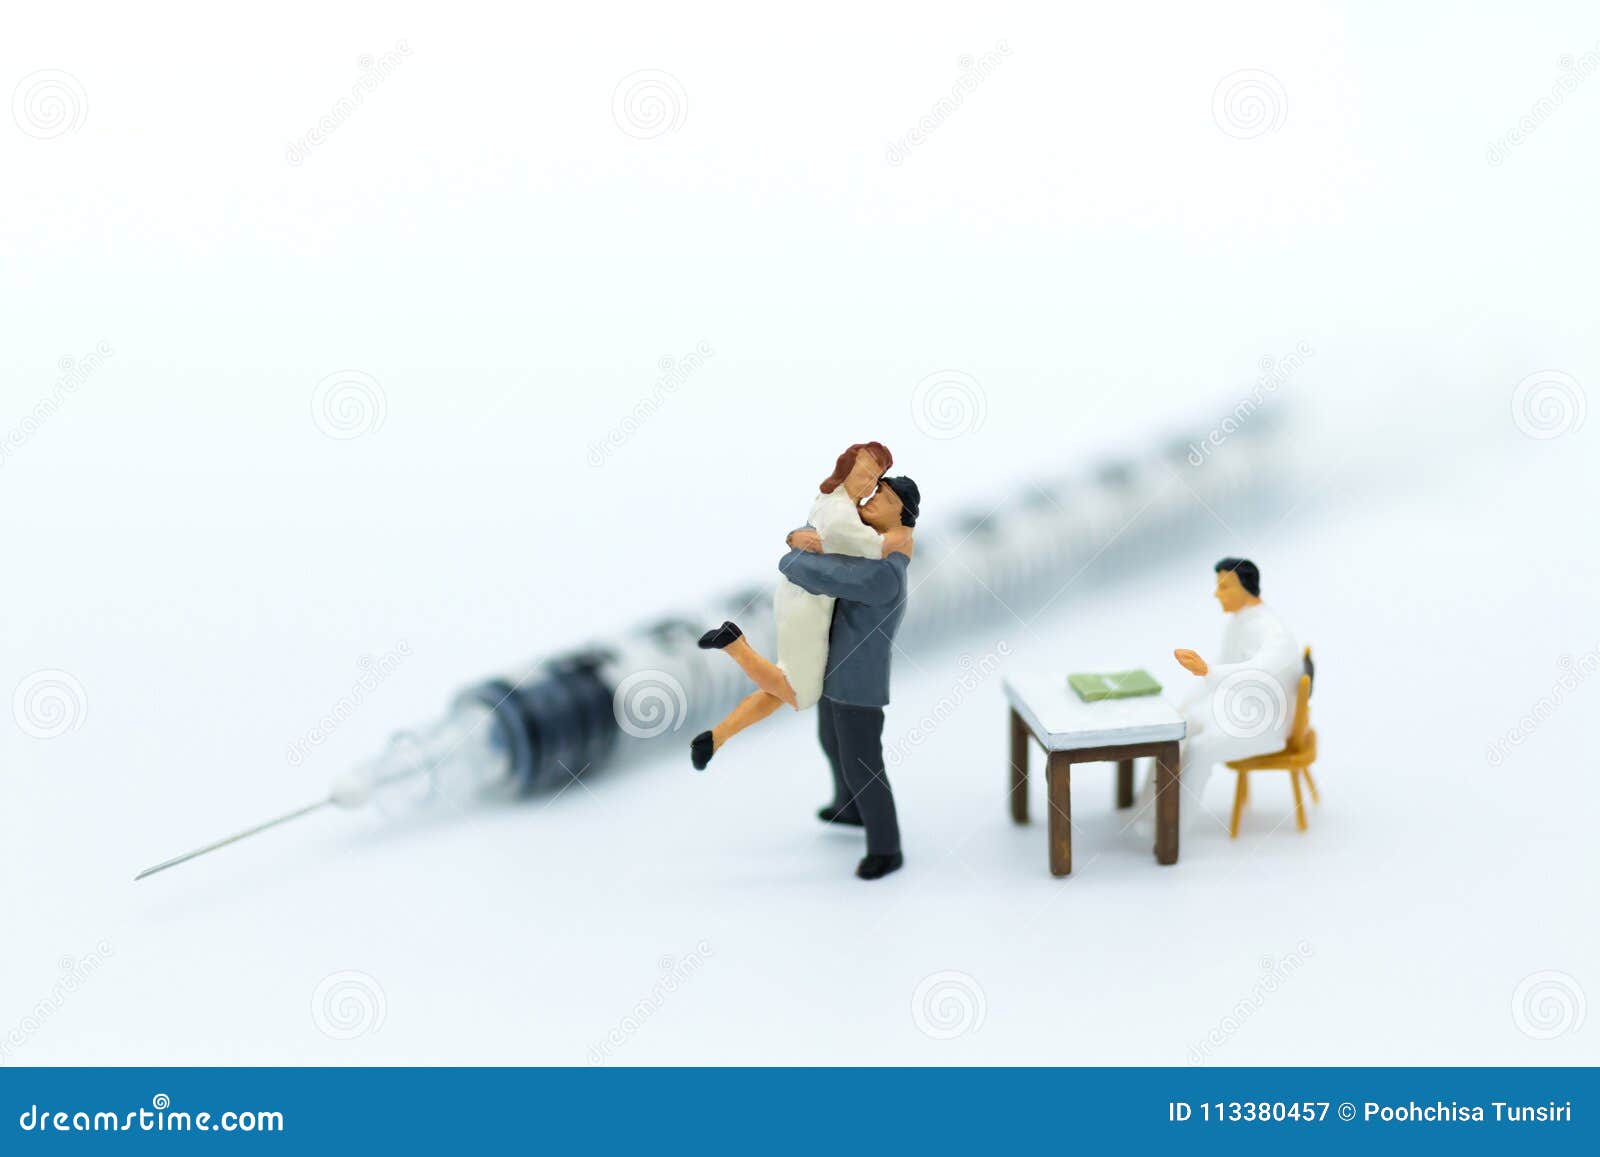 miniature people: couples with physical examination before marriage. image use for family readiness, health care concept